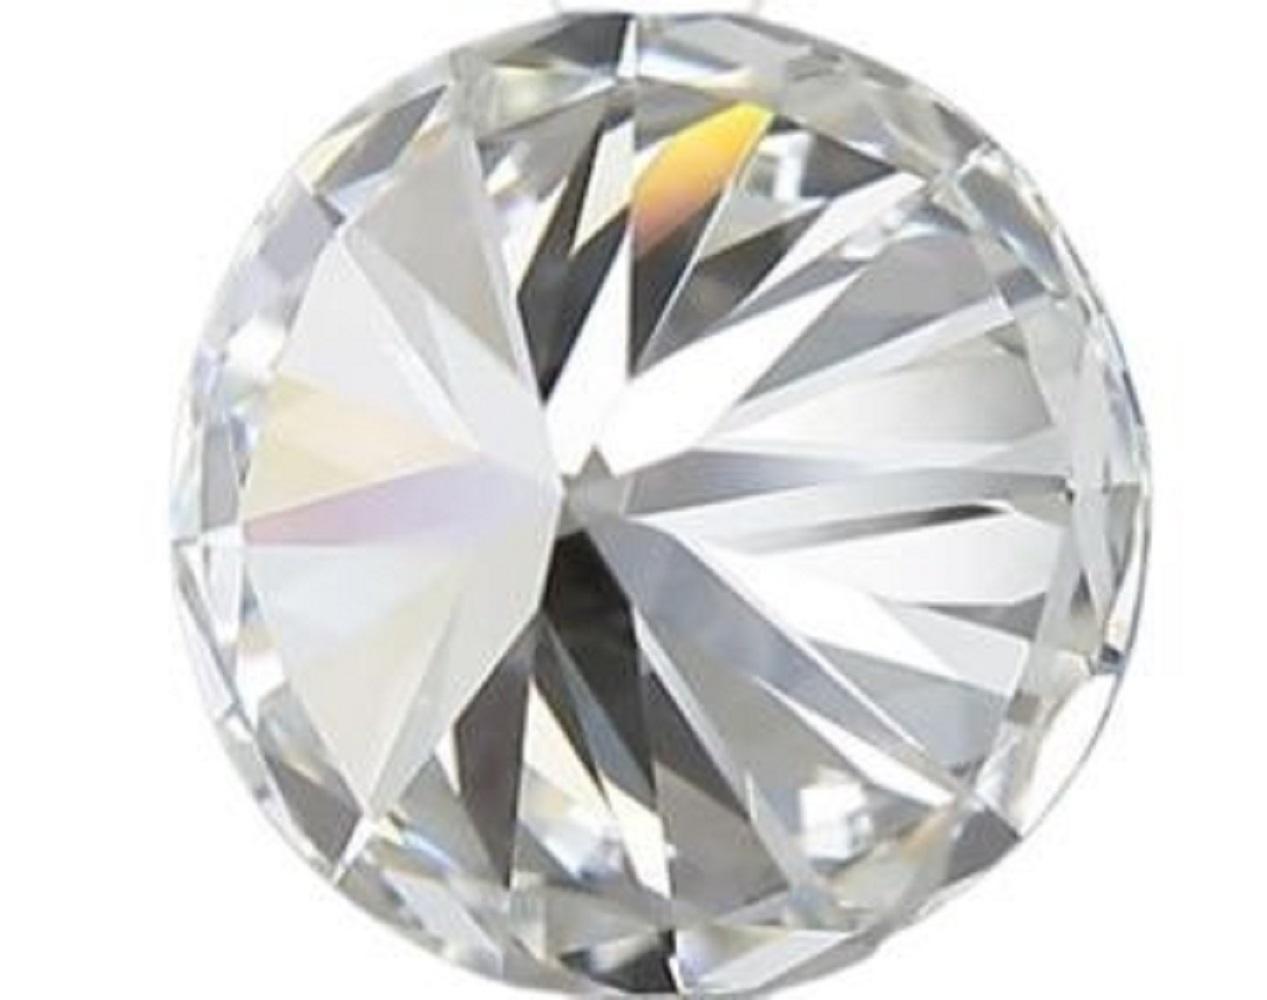 Women's or Men's Sparkling 1pc Flawless Natural Diamond with 0.53 ct Round D IF IGI Certificate